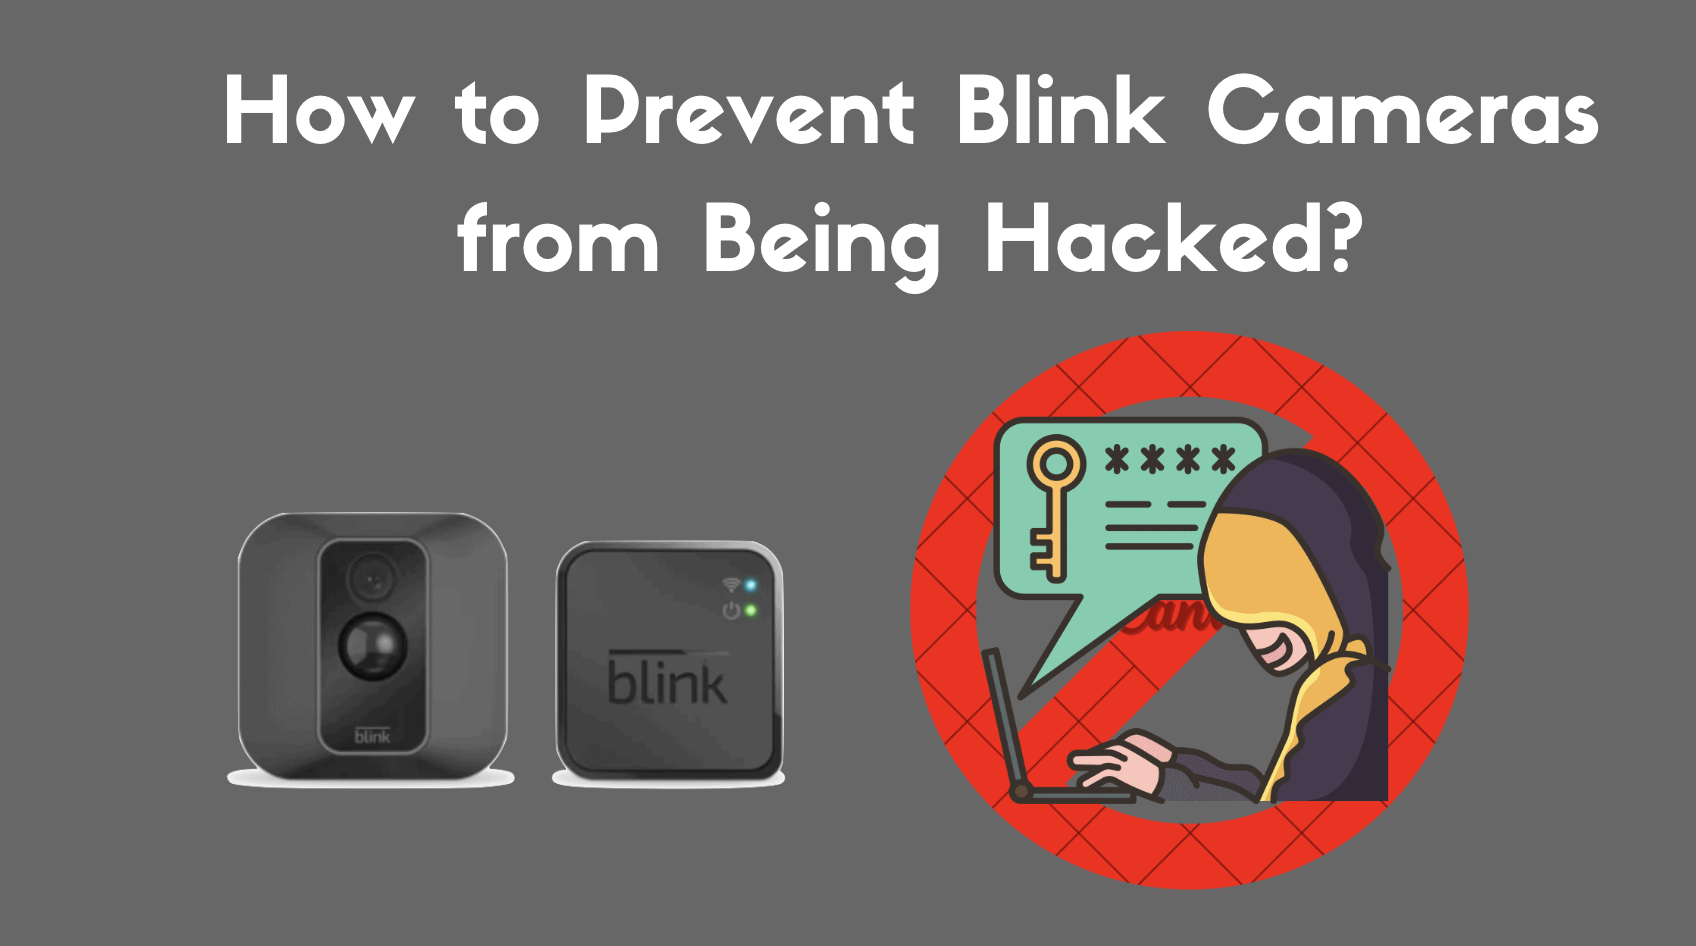 How to Prevent Blink Cameras from Being Hacked?